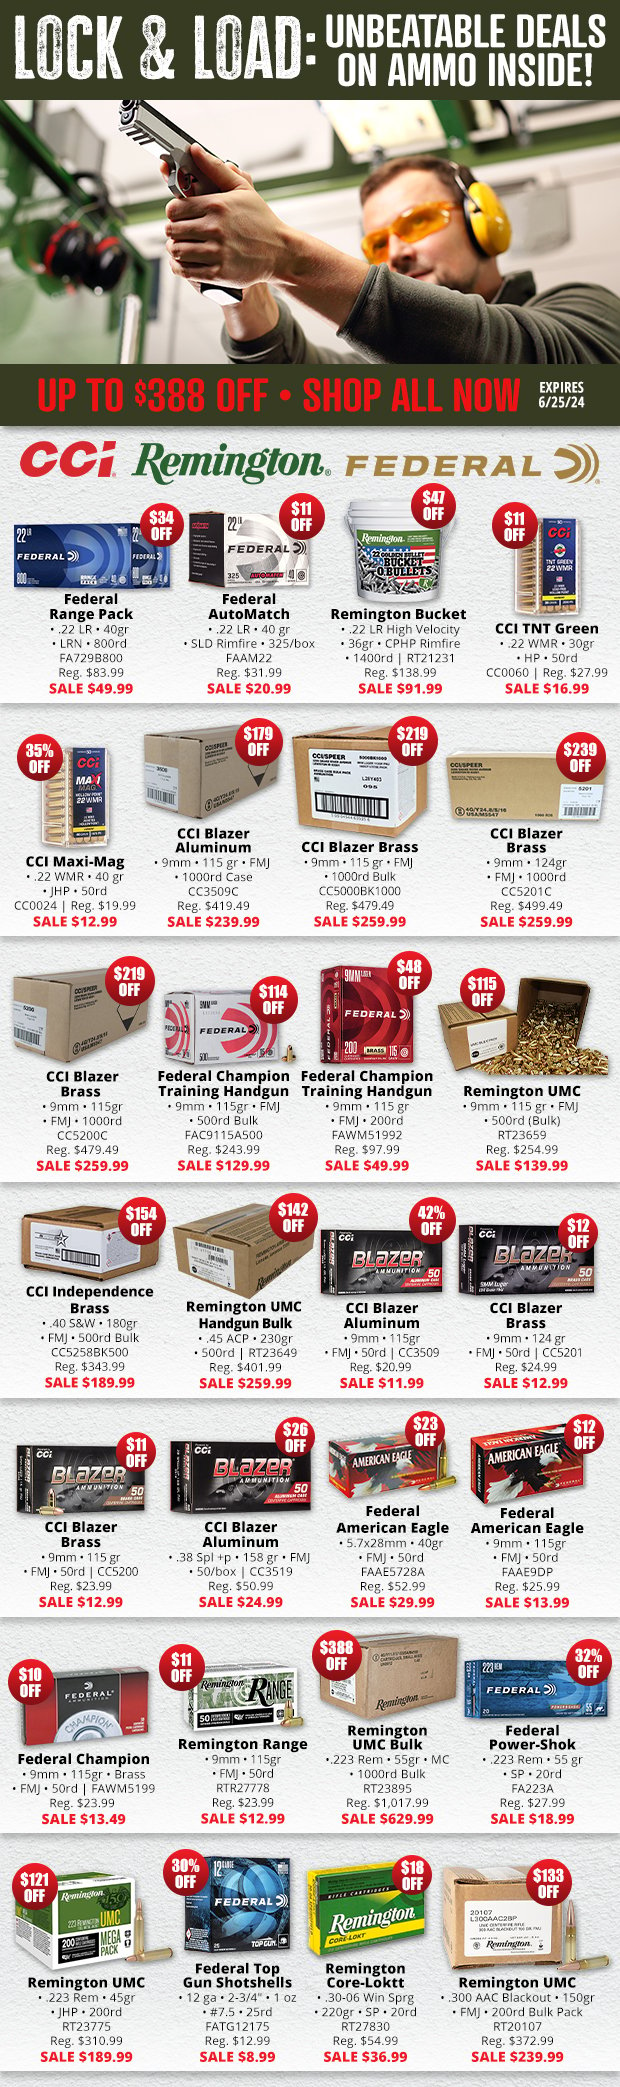 Up to $388 Off Ammo Deals!